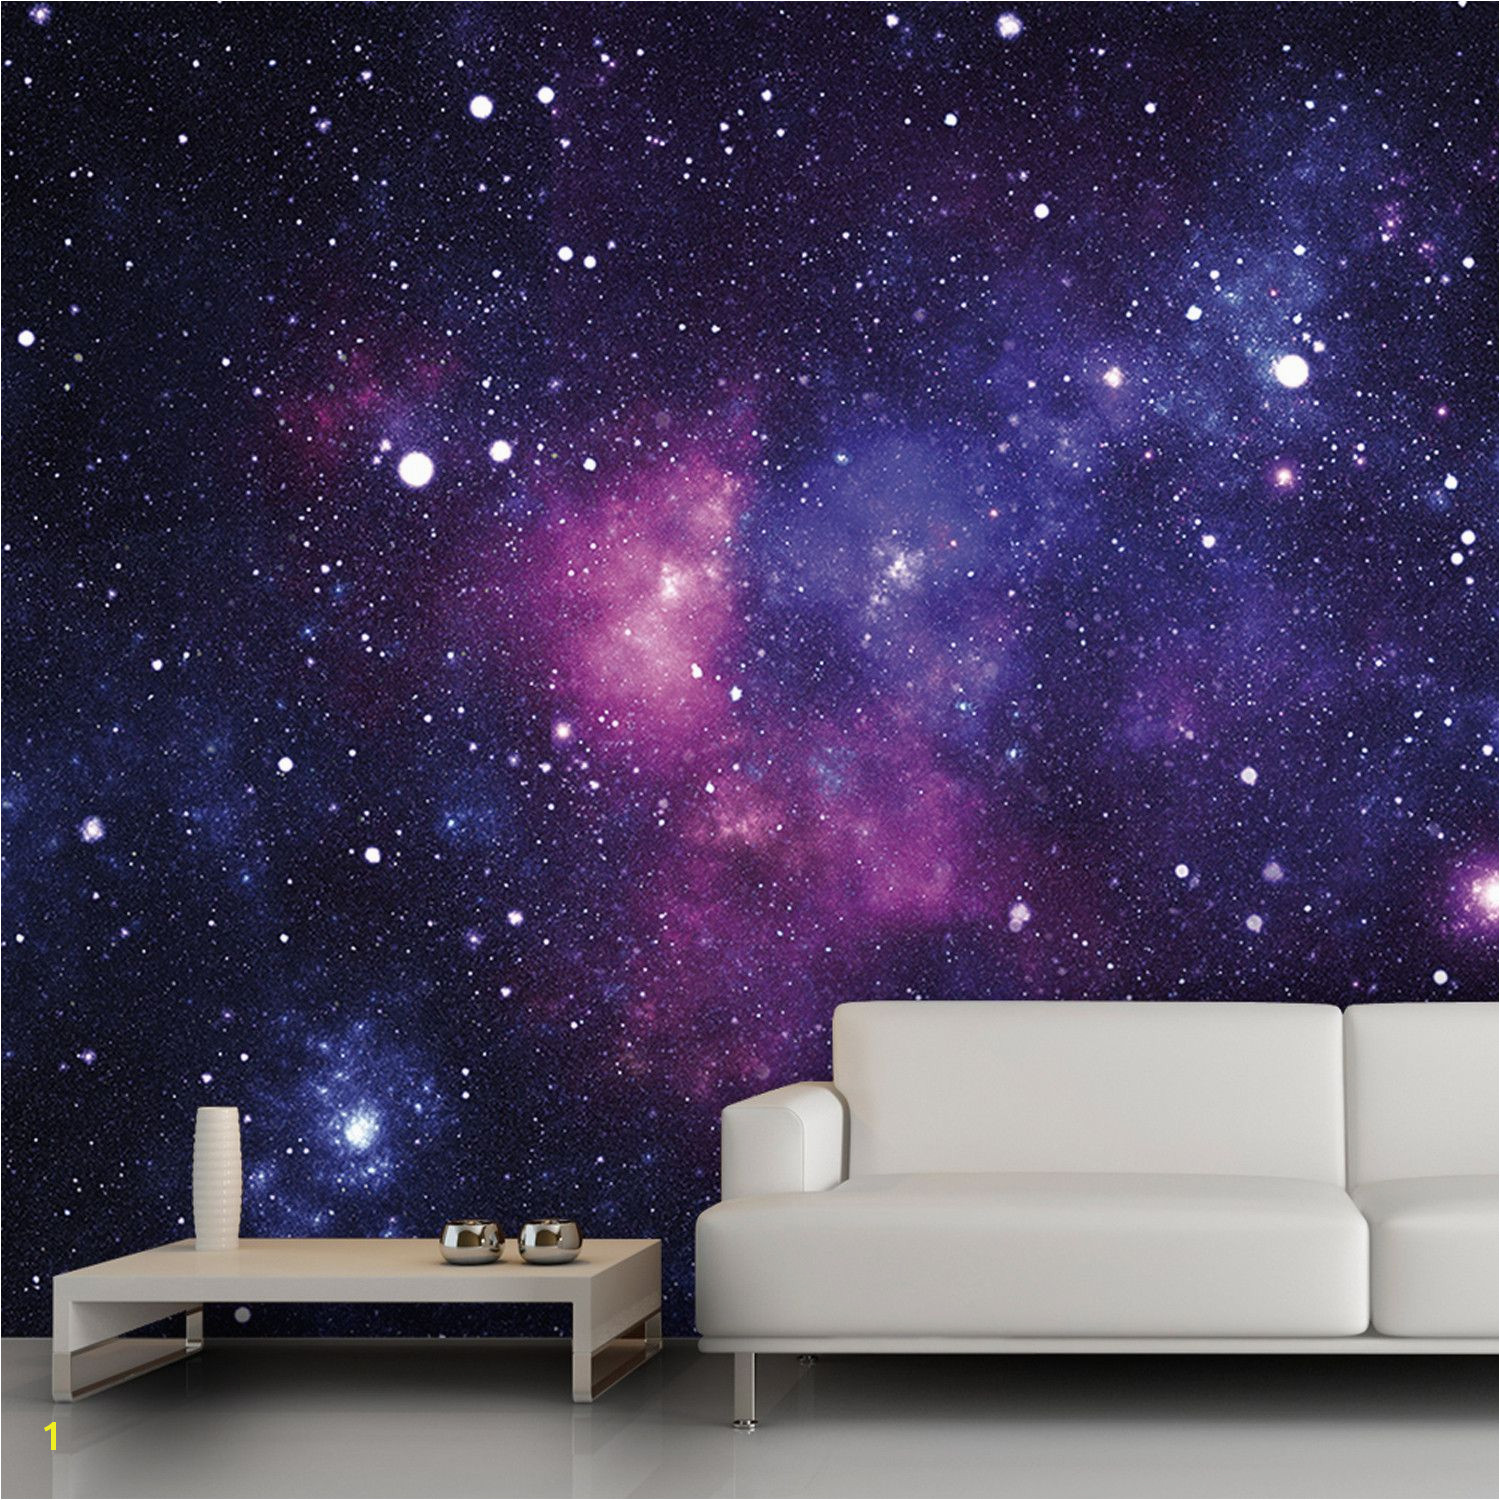 Galaxy wall mural 13 x9 $54 trying to think of cool wall decor for practice rooms and or hang space tied in to songs Ziggy stardusk